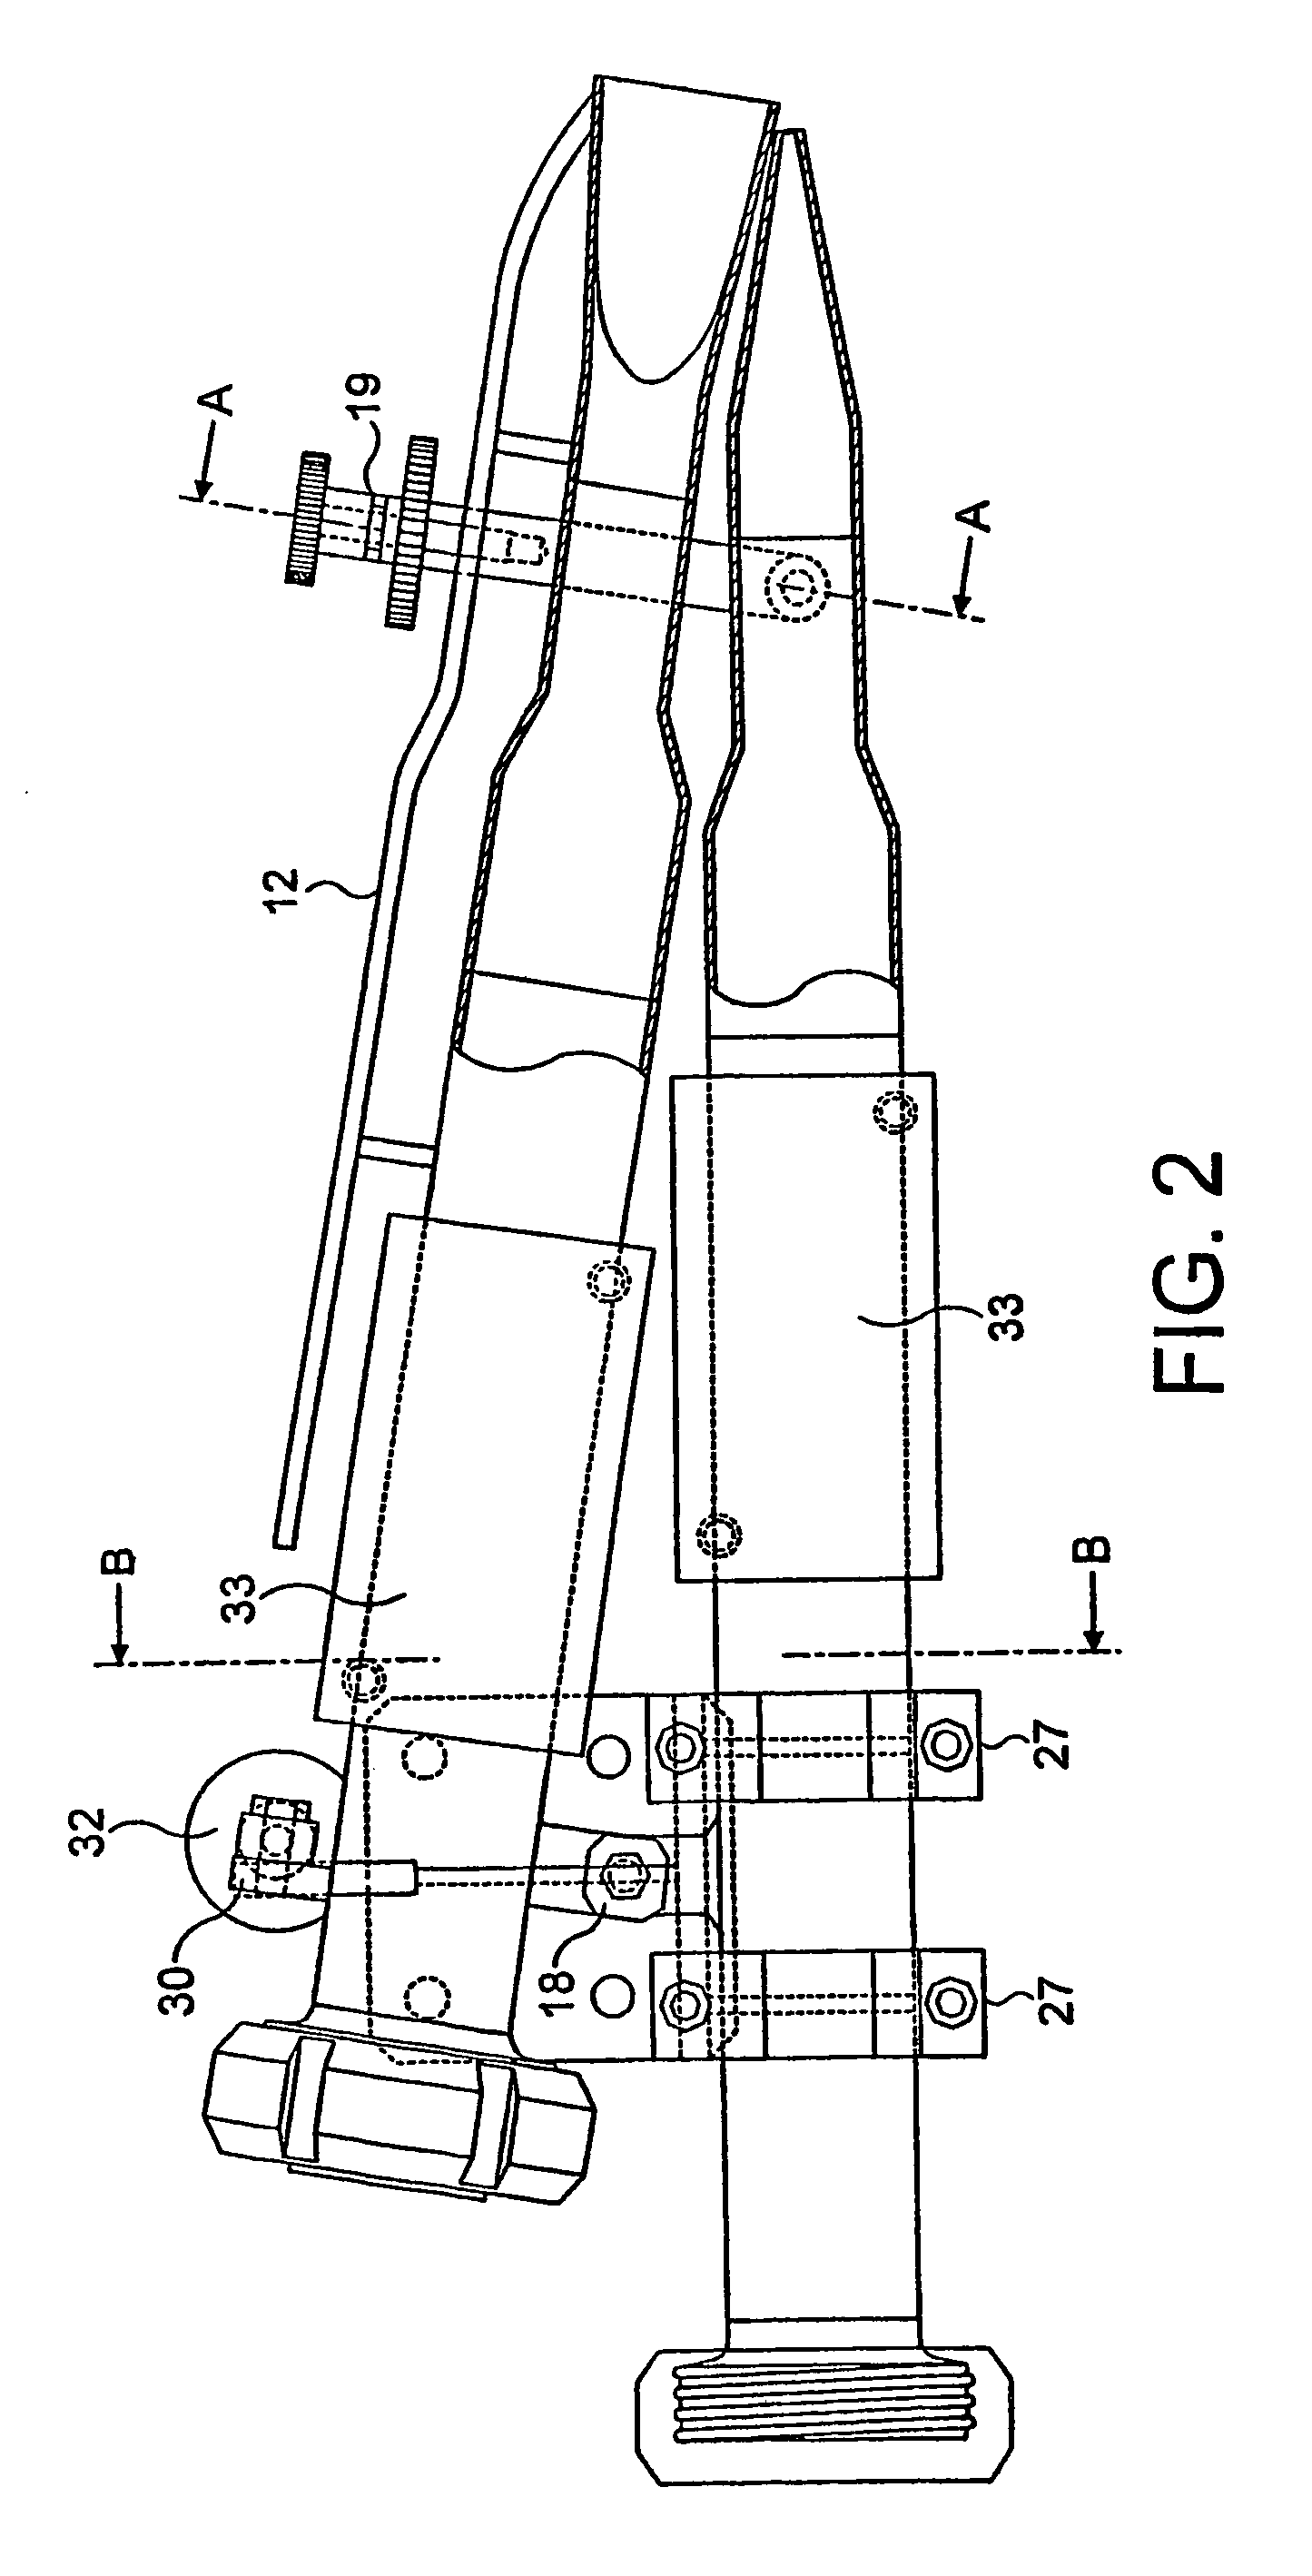 Method and apparatus for manufacturing decorated ice cream confectionery items